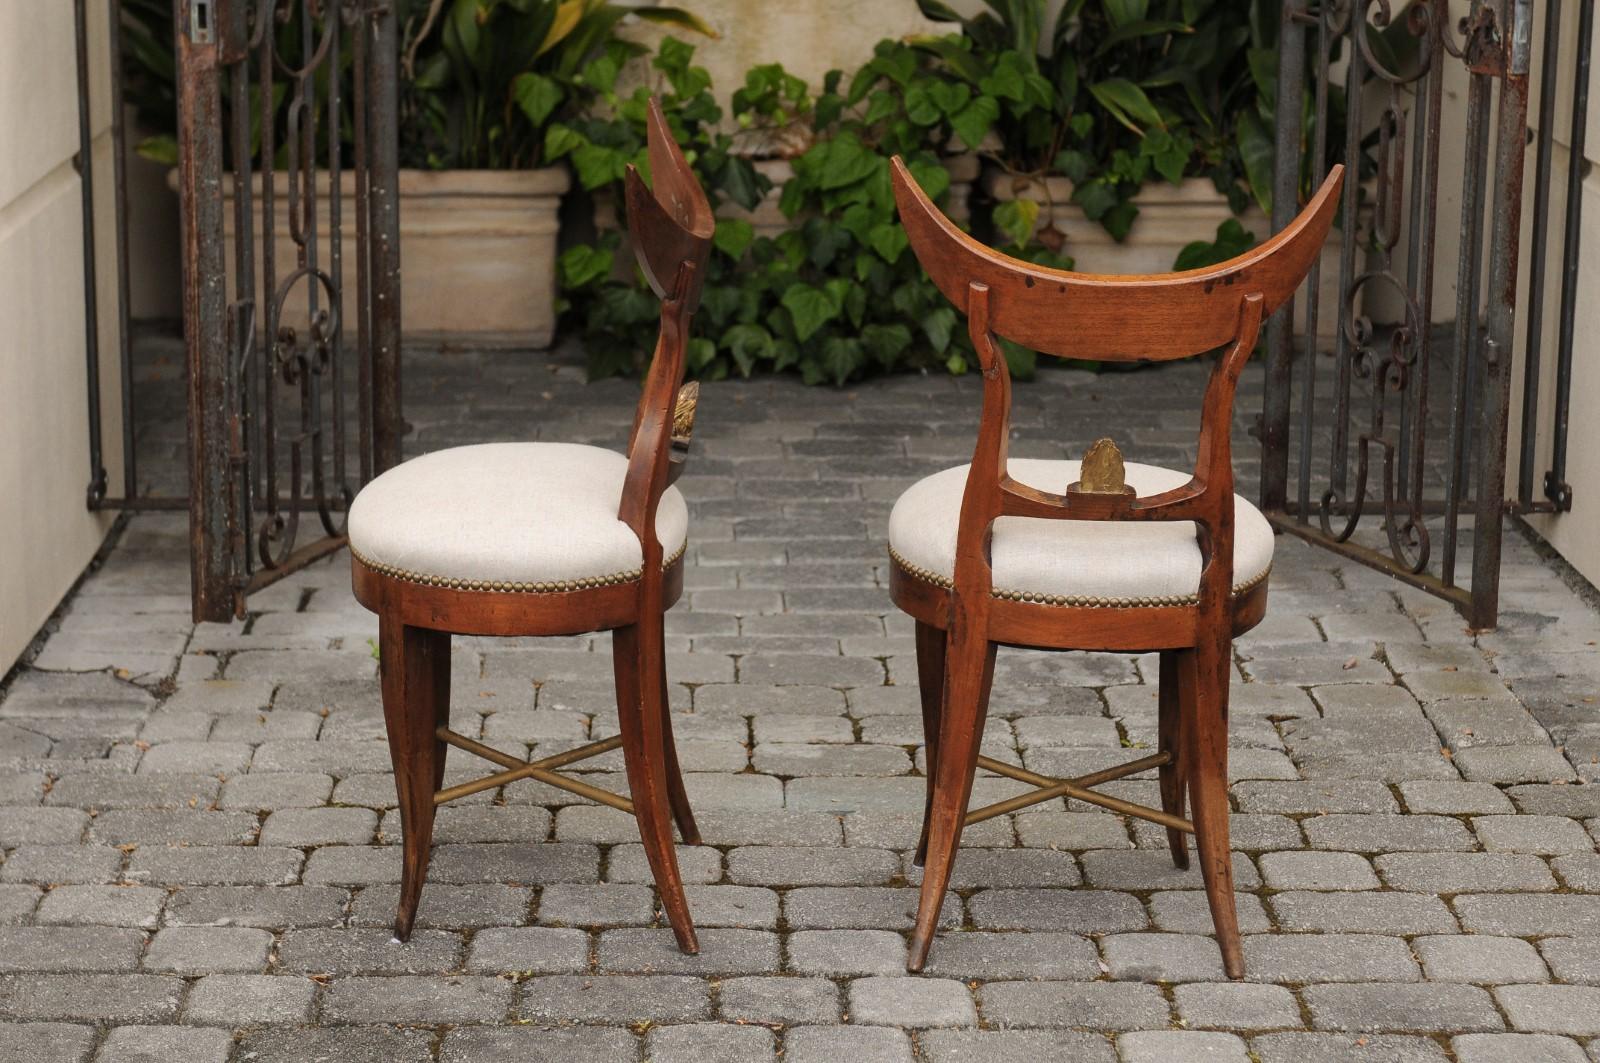 A pair of Italian side chairs from the mid-19th century, with crescent shaped backs, new linen upholstered seats and saber legs. Born in Italy during the third quarter of the 19th century, each of this pair of unusual Italian chairs features a